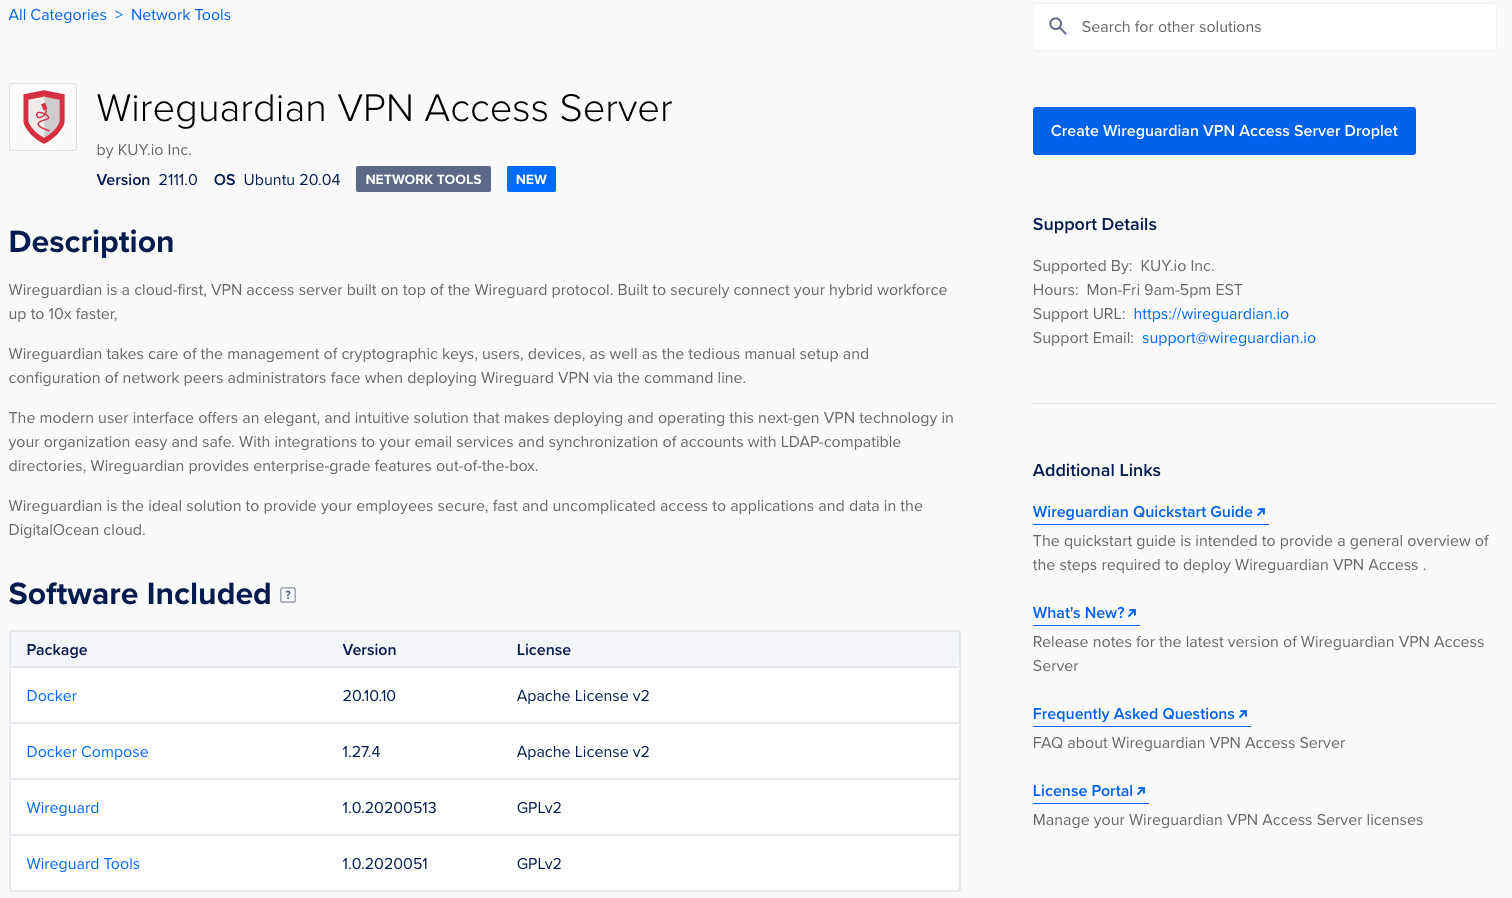 KUY.io Konnect™ access server is now available as a 1-click image from the DigitalOcean Marketplace. Deploy your own Konnect™ server with the click of a single button.